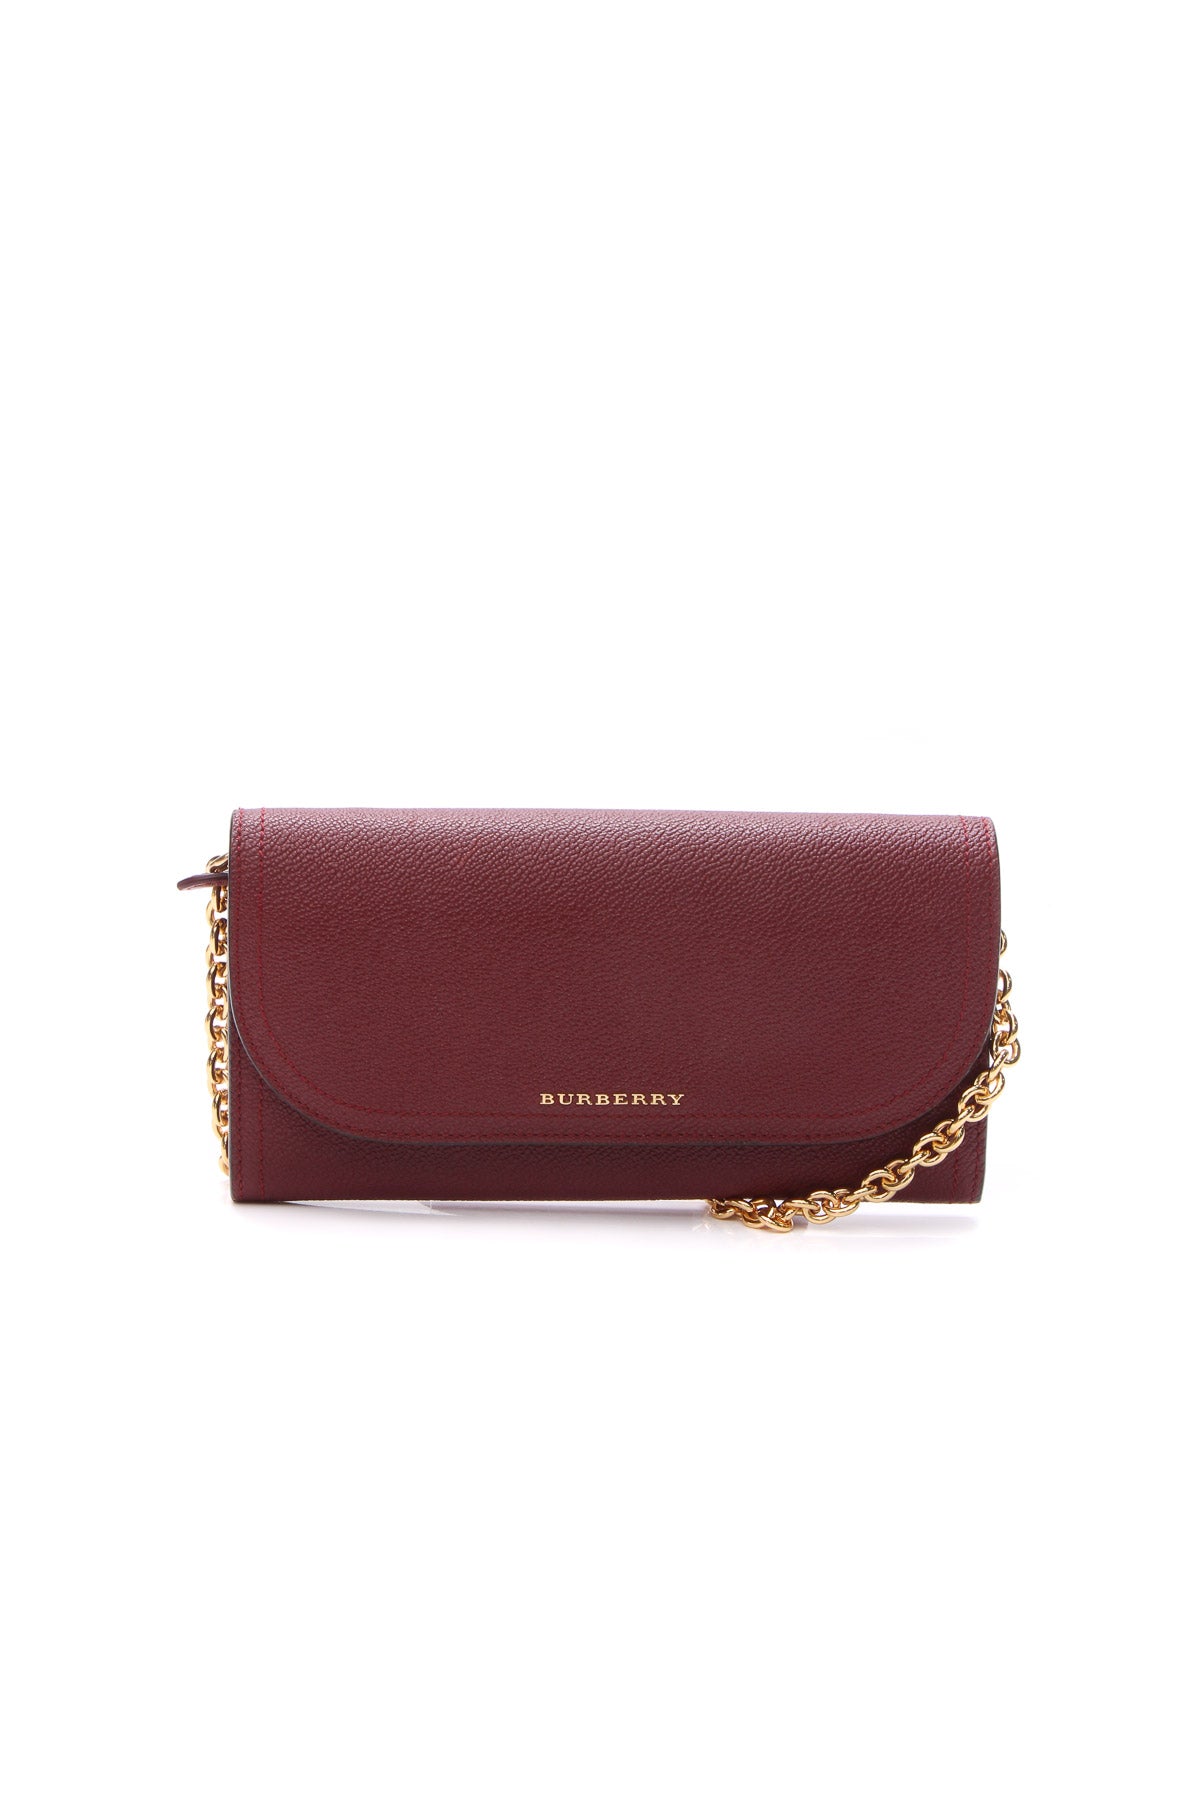 Burberry Henley House Check Leather Wallet on Chain Crossbody Bag Brown